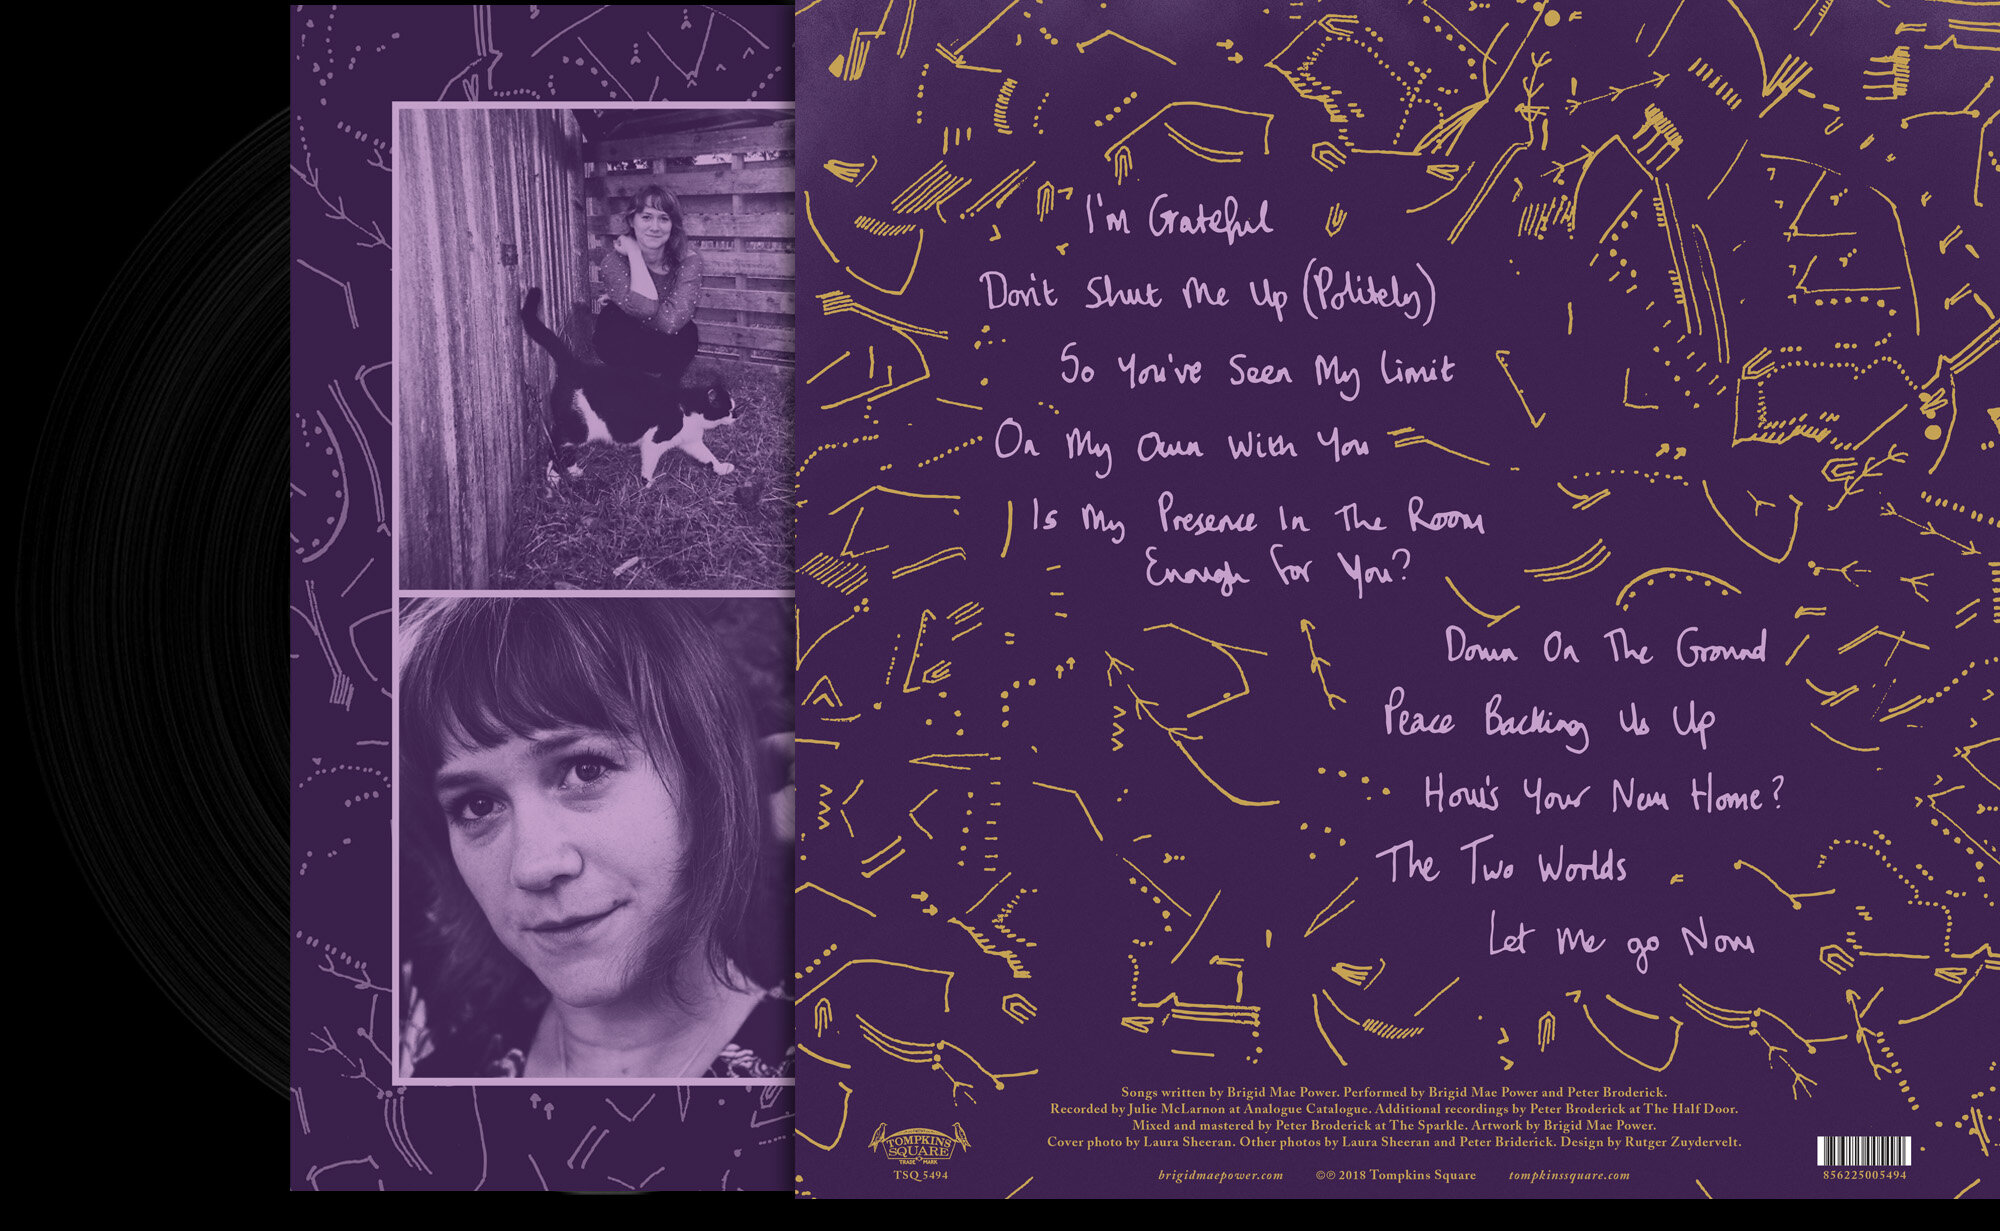  lp back cover/inner sleeve photos by Laura Sheeran and Peter Broderick illustrations by Bridig Mae Power – Brigid Mae Power The Two Worlds Tompkins Square, 2018 